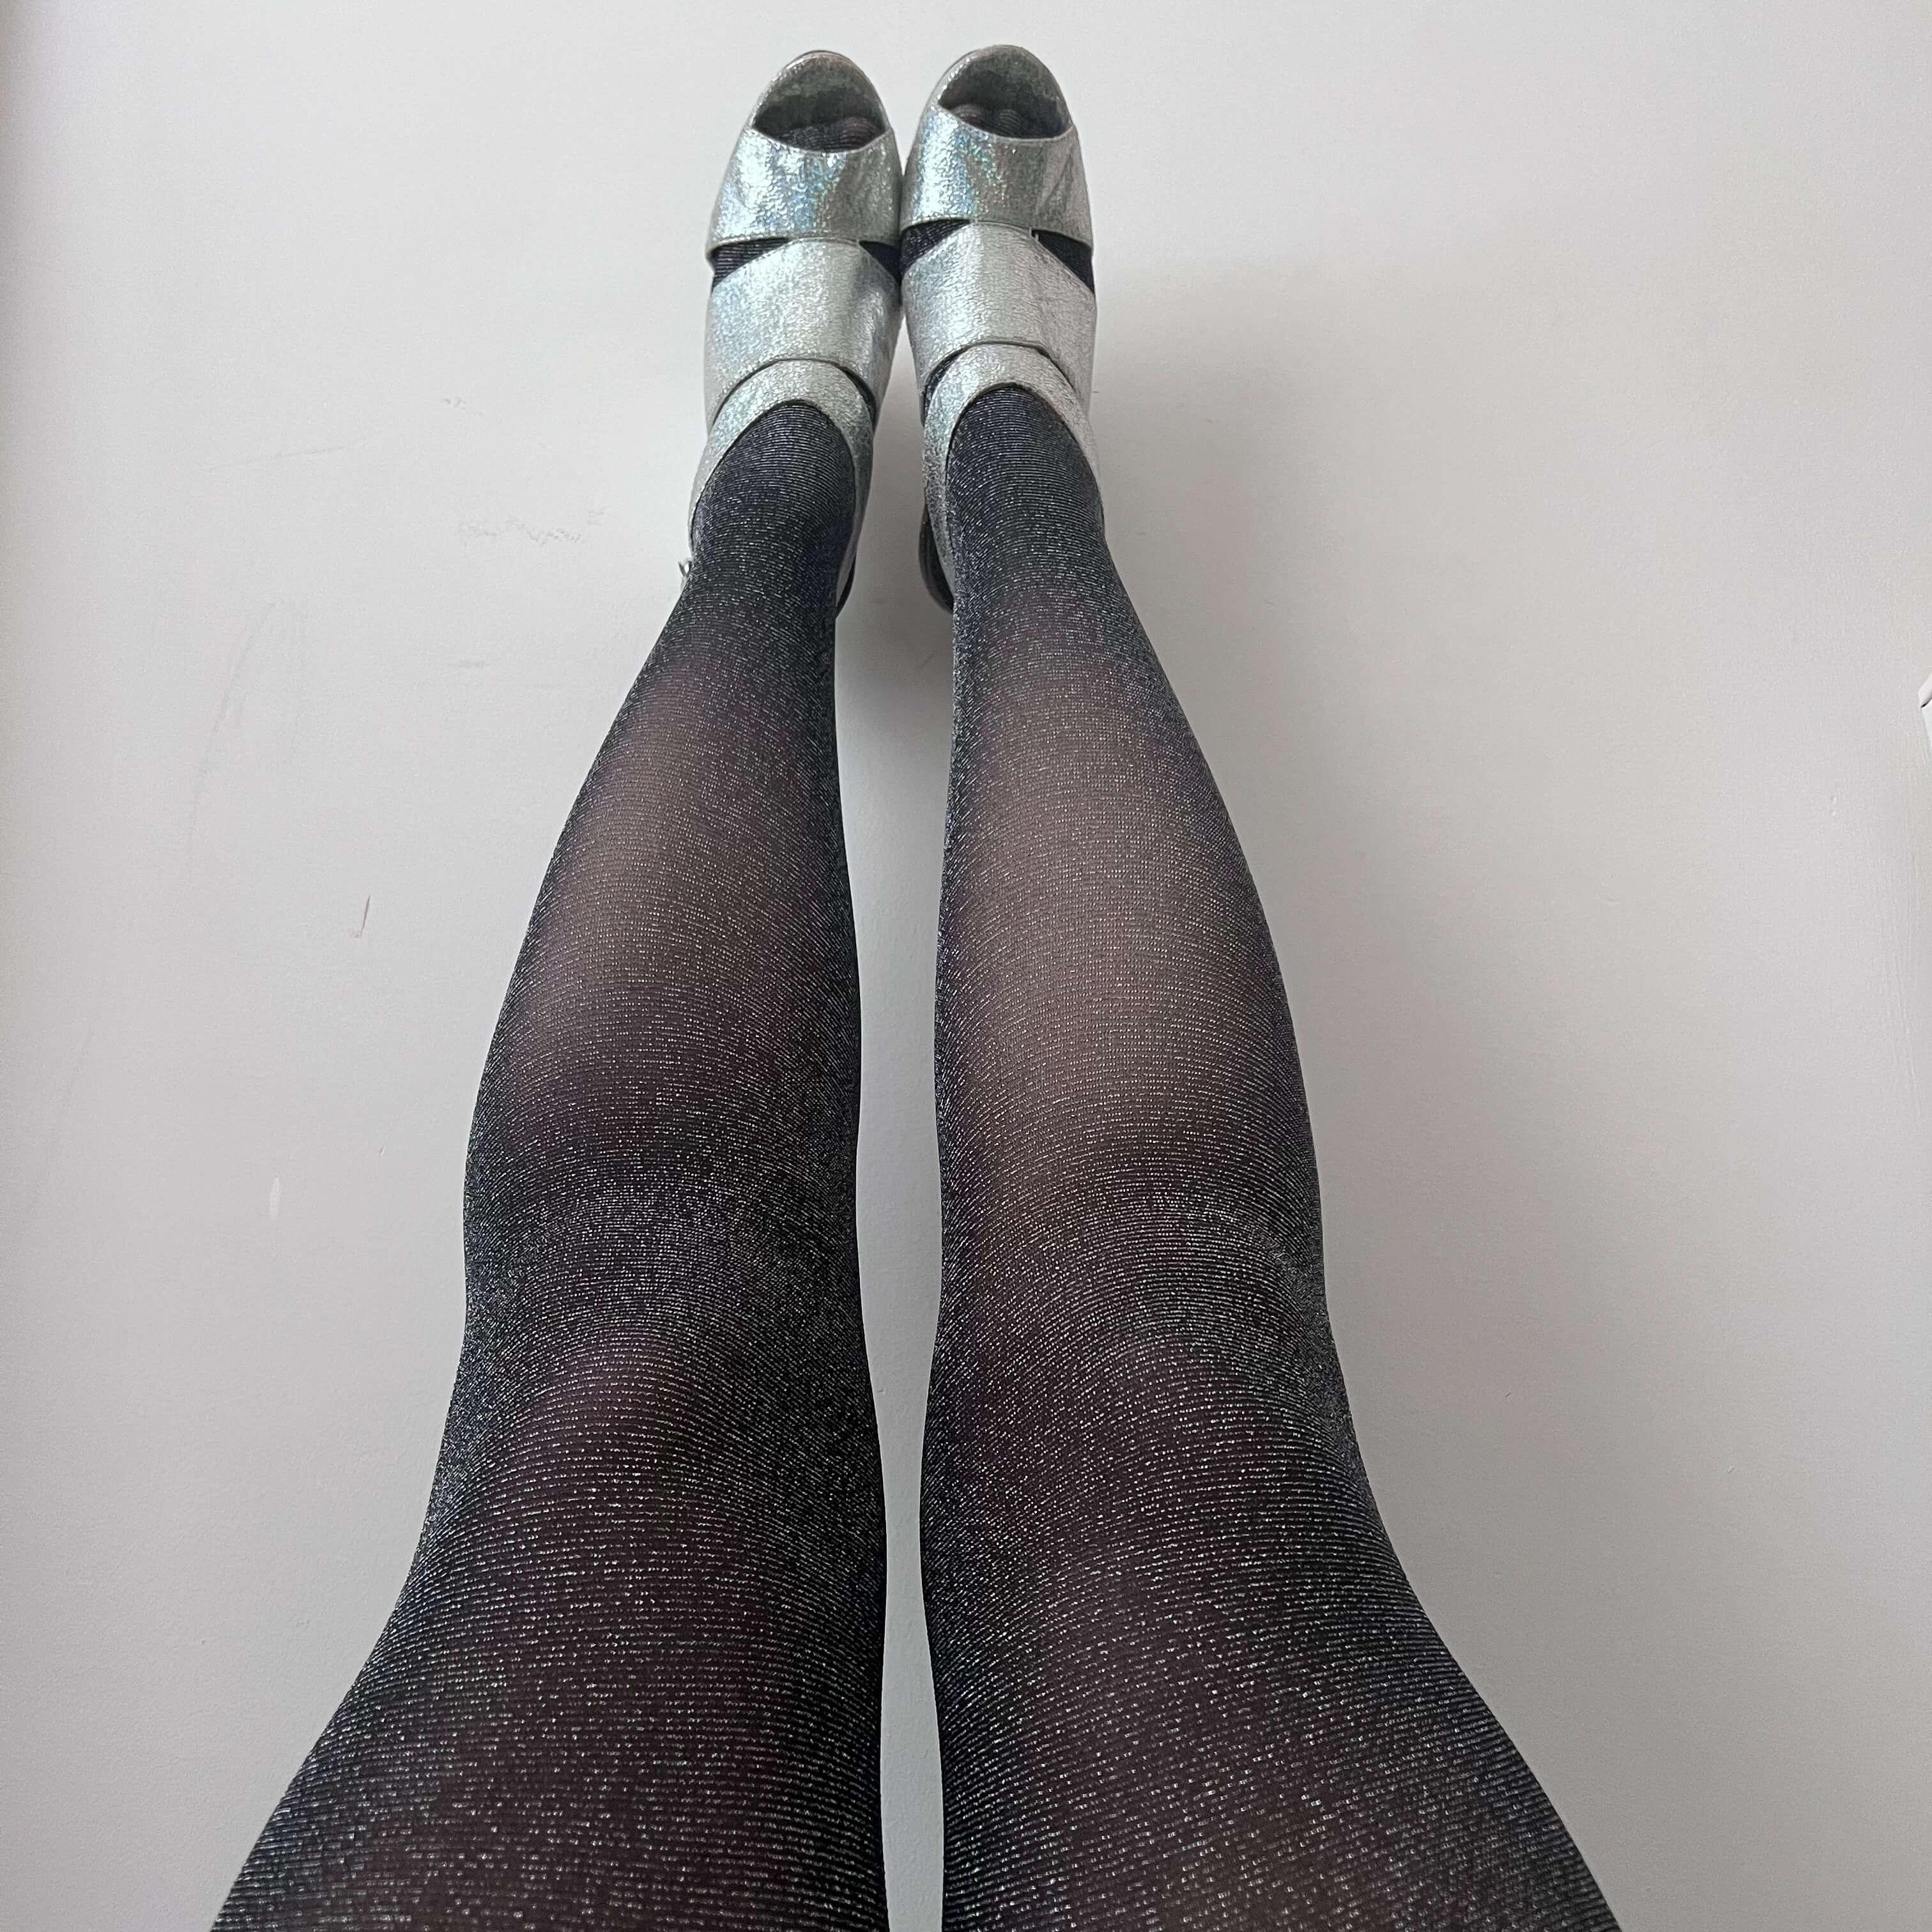 BLACK SILVER LUREX SPARKLY OPAQUE TIGHTS PANTYHOSE GLITTER ONE SIZE 8 - 14  UK